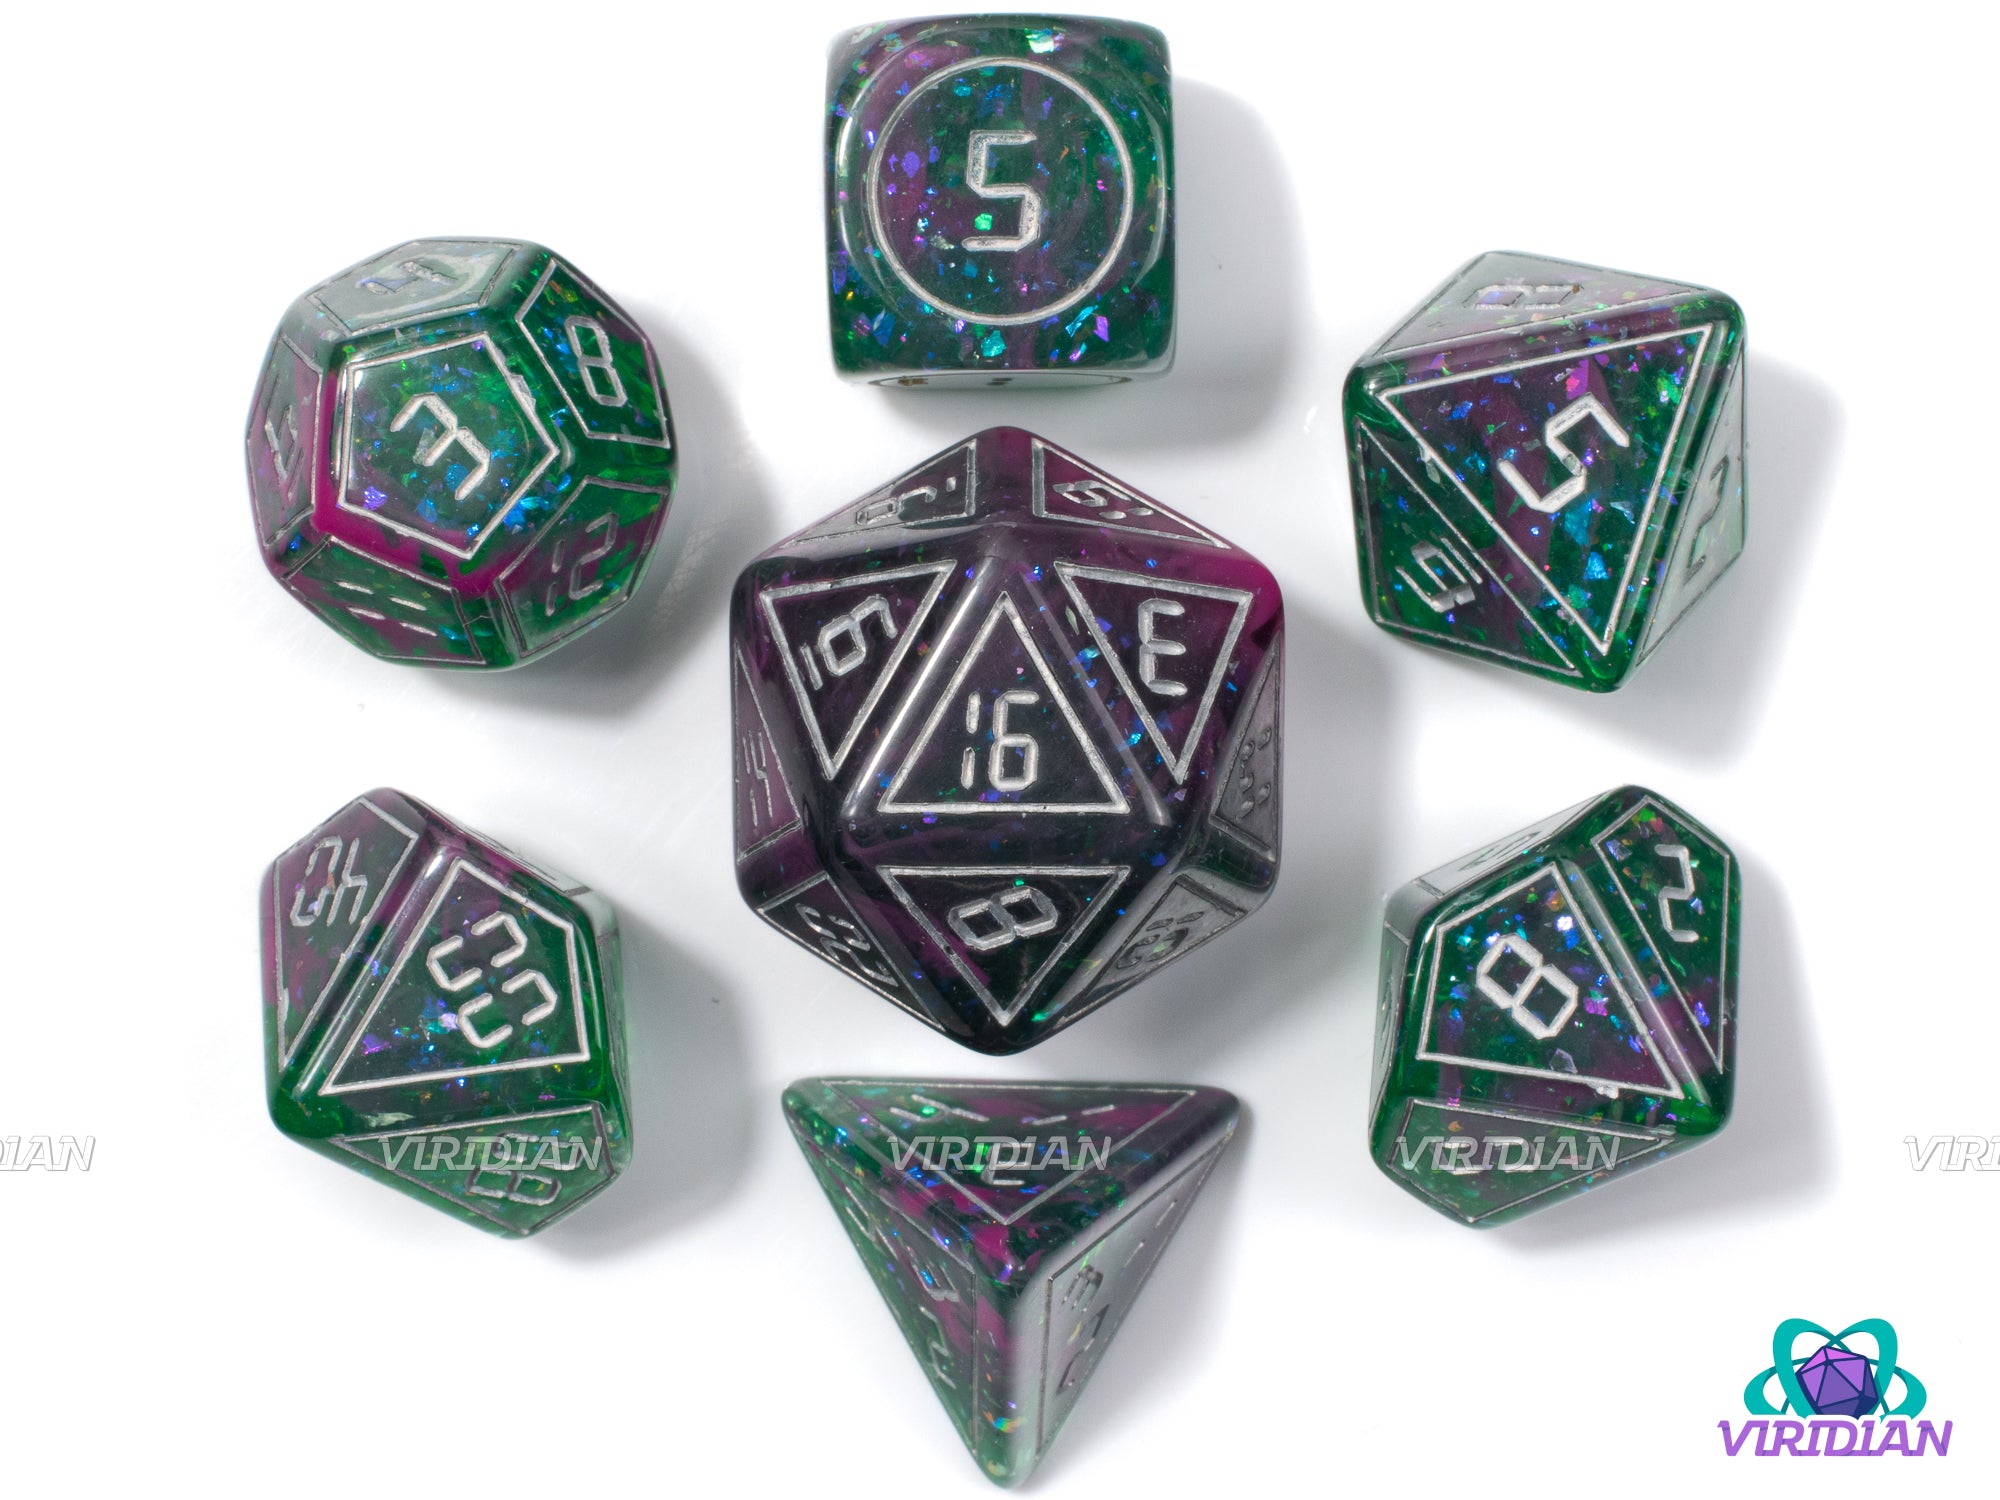 Planetary | Green and Dark Purple-Pink, Foil & Glitter, Digital Font, Silver Accents | Resin Dice Set (7)